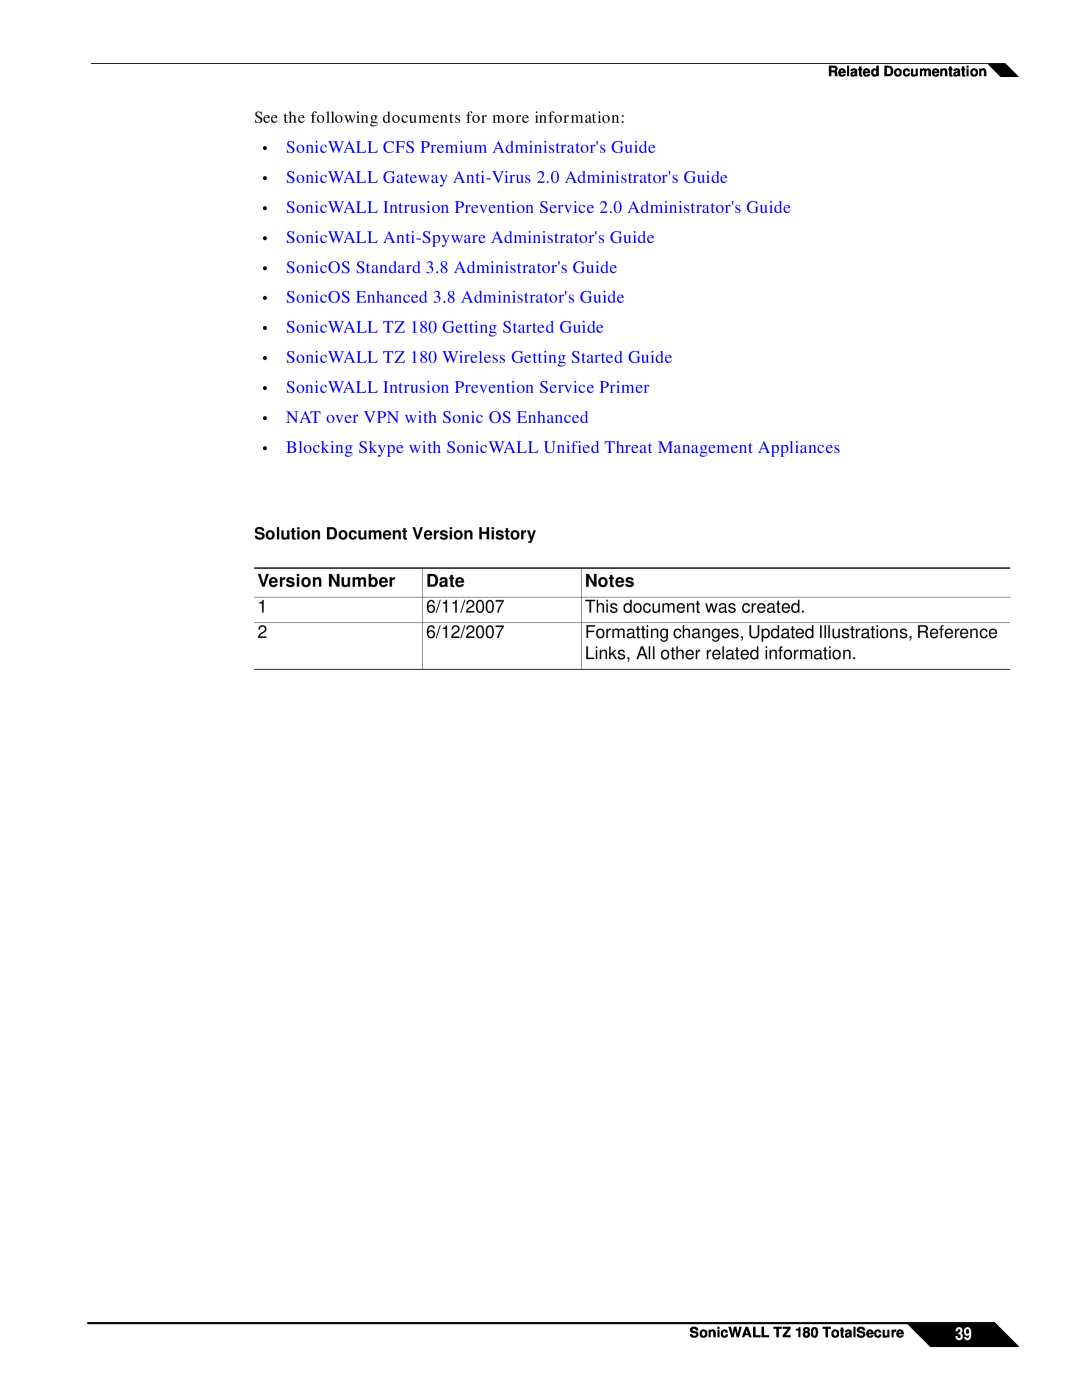 SonicWALL TZ 180 Solution Document Version History, Version Number, Date, 6/11/2007, This document was created, 6/12/2007 